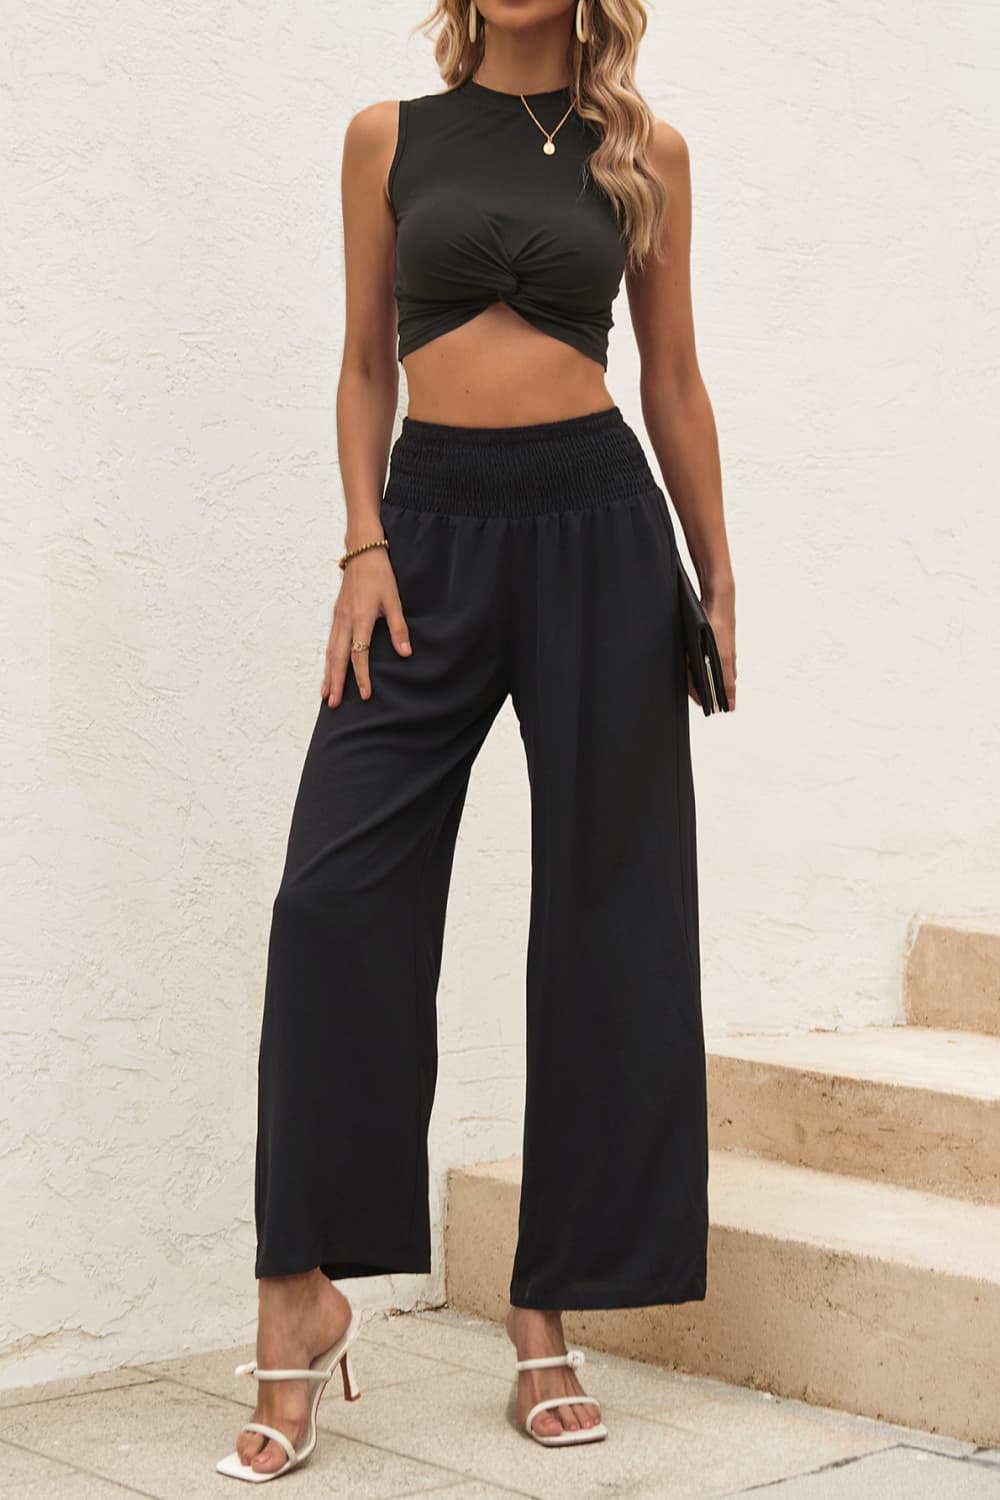 Twist Front Cropped Tank and Pants Set - Cheeky Chic Boutique